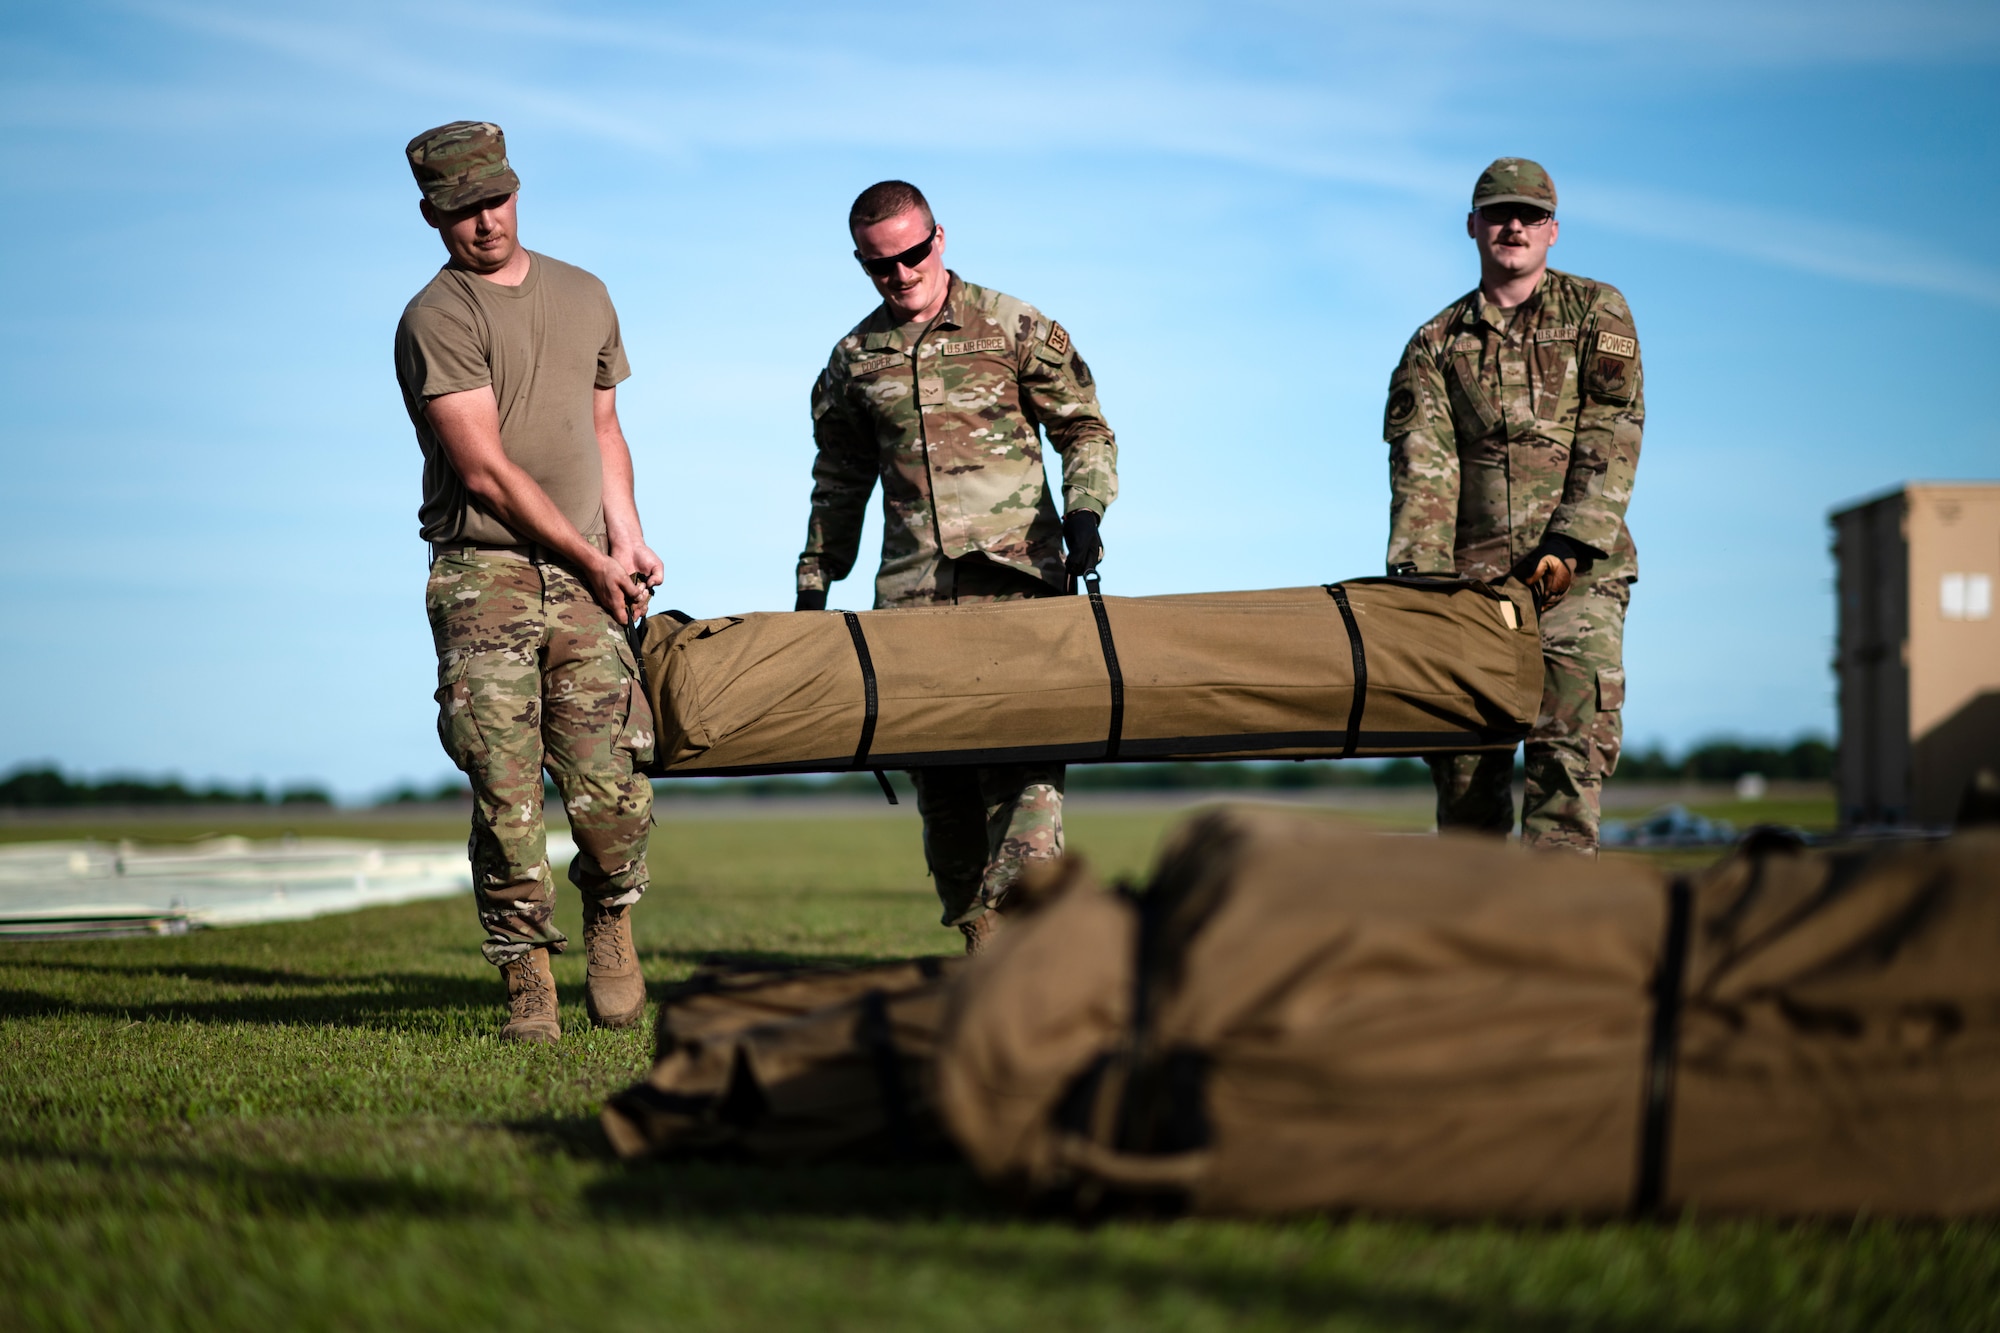 U.S. Air Force Senior Airman Jacob Kangas, 23rd Civil Engineer Squadron structural journeyman; Airman 1st Class Nathaniel Cooper, 23rd CES structural apprentice; and Airman 1st Class Mark Riester, 23rd CES power production apprentice, carry tent equipment at Avon Park Air Force Range, Florida, April 8, 2024. The Airmen established shelters to support food provisions, maintenance operations, and communications for the 23rd Air Base Squadron’s forward operating site. Built upon Air Combat Command's directive to assert air power in contested environments, exercise Ready Tiger 24-1 aims to test and enhance the 23rd Wing’s proficiency in executing Lead Wing and expeditionary air base concepts through Agile Combat Employment and command and control operations. (U.S. Air Force photo by Tech. Sgt. Devin Boyer)